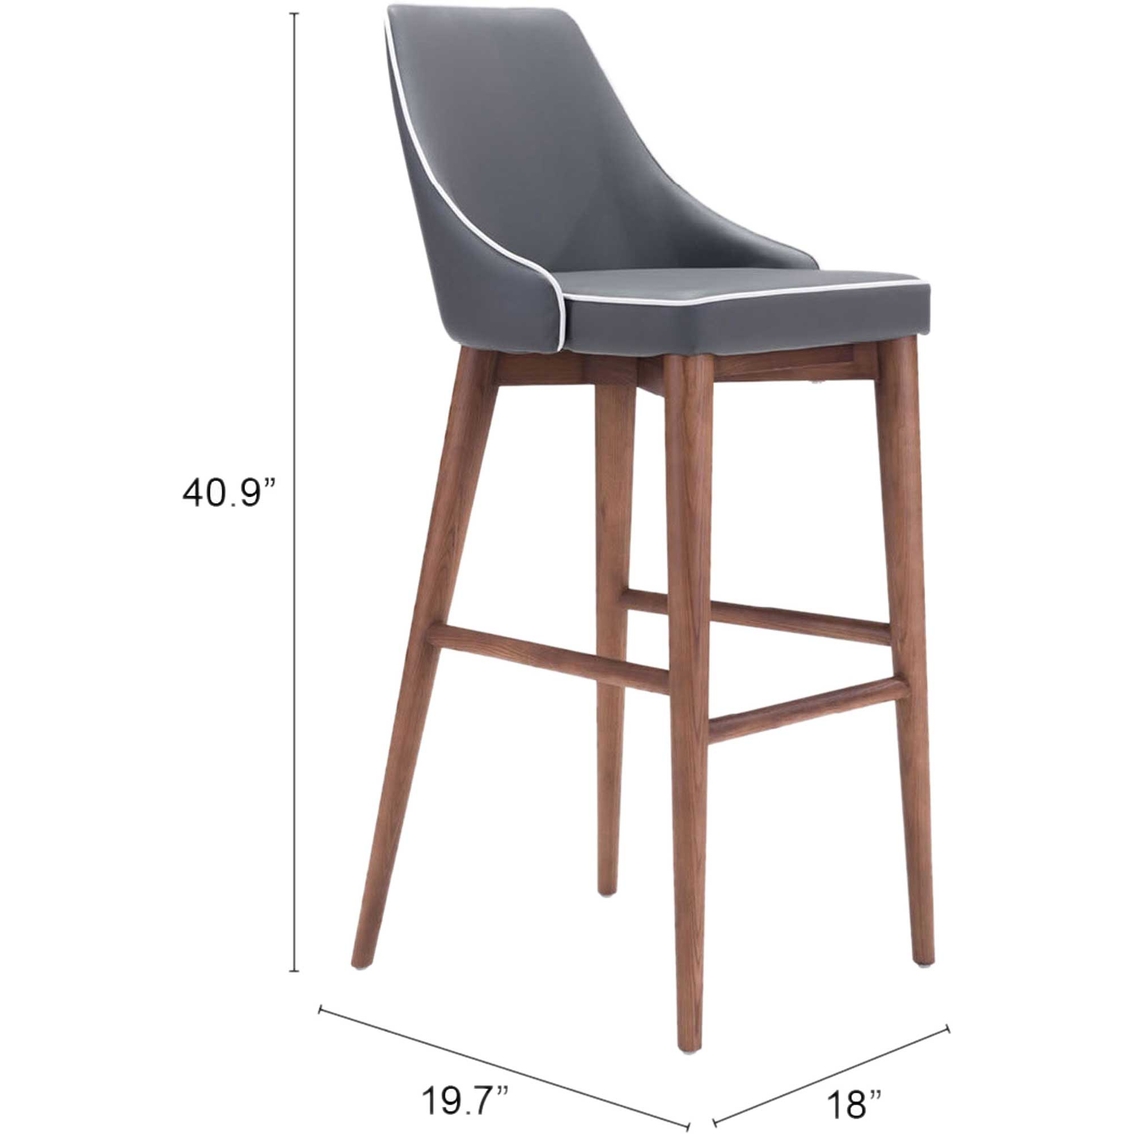 Zuo Moor Bar Chair - Image 6 of 8